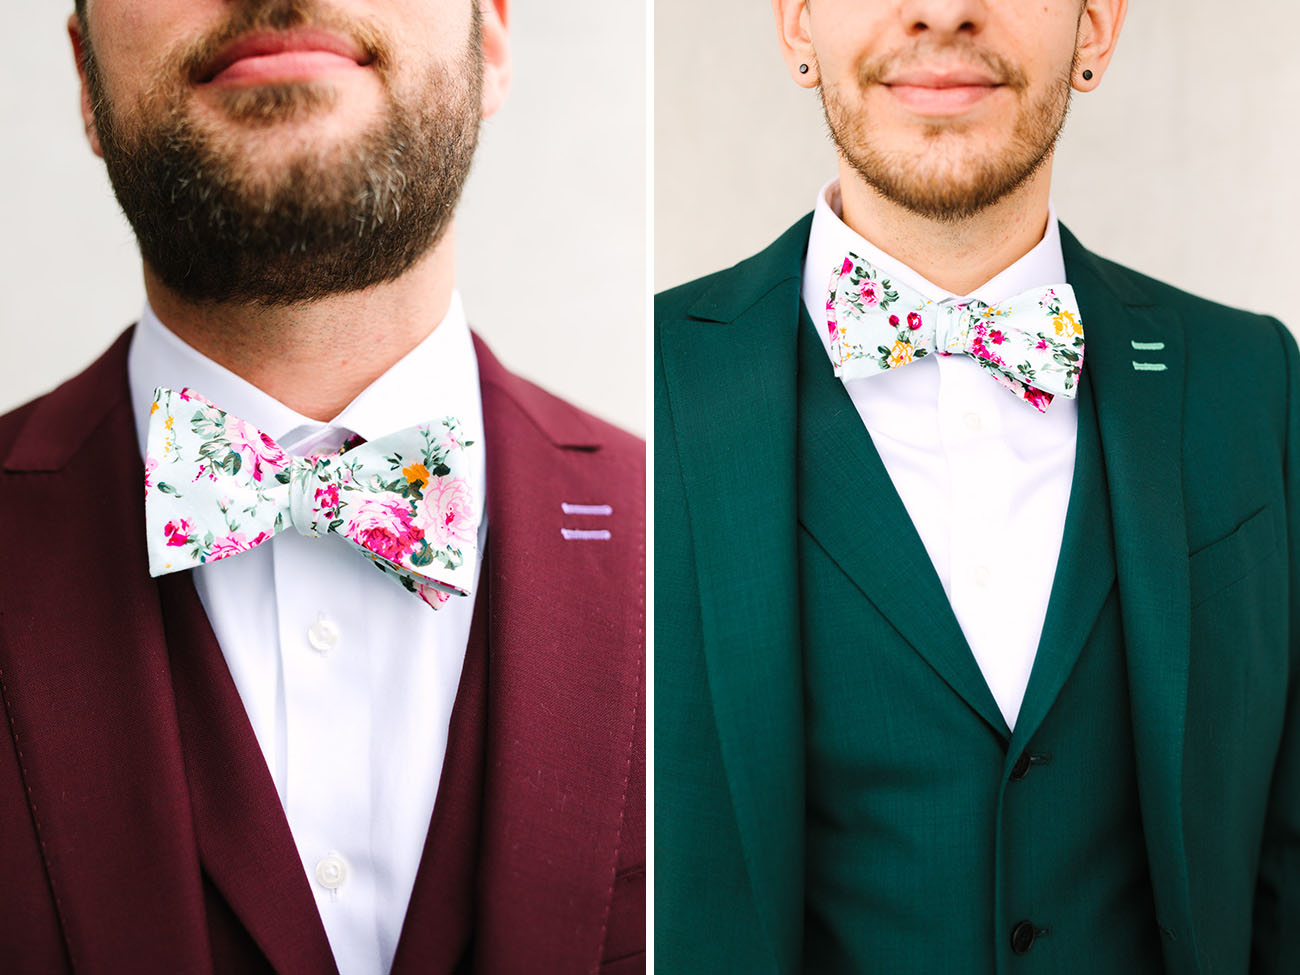 The grooms were rocking a burgundy and an emerald three piece suit plus mathcing floral bow ties